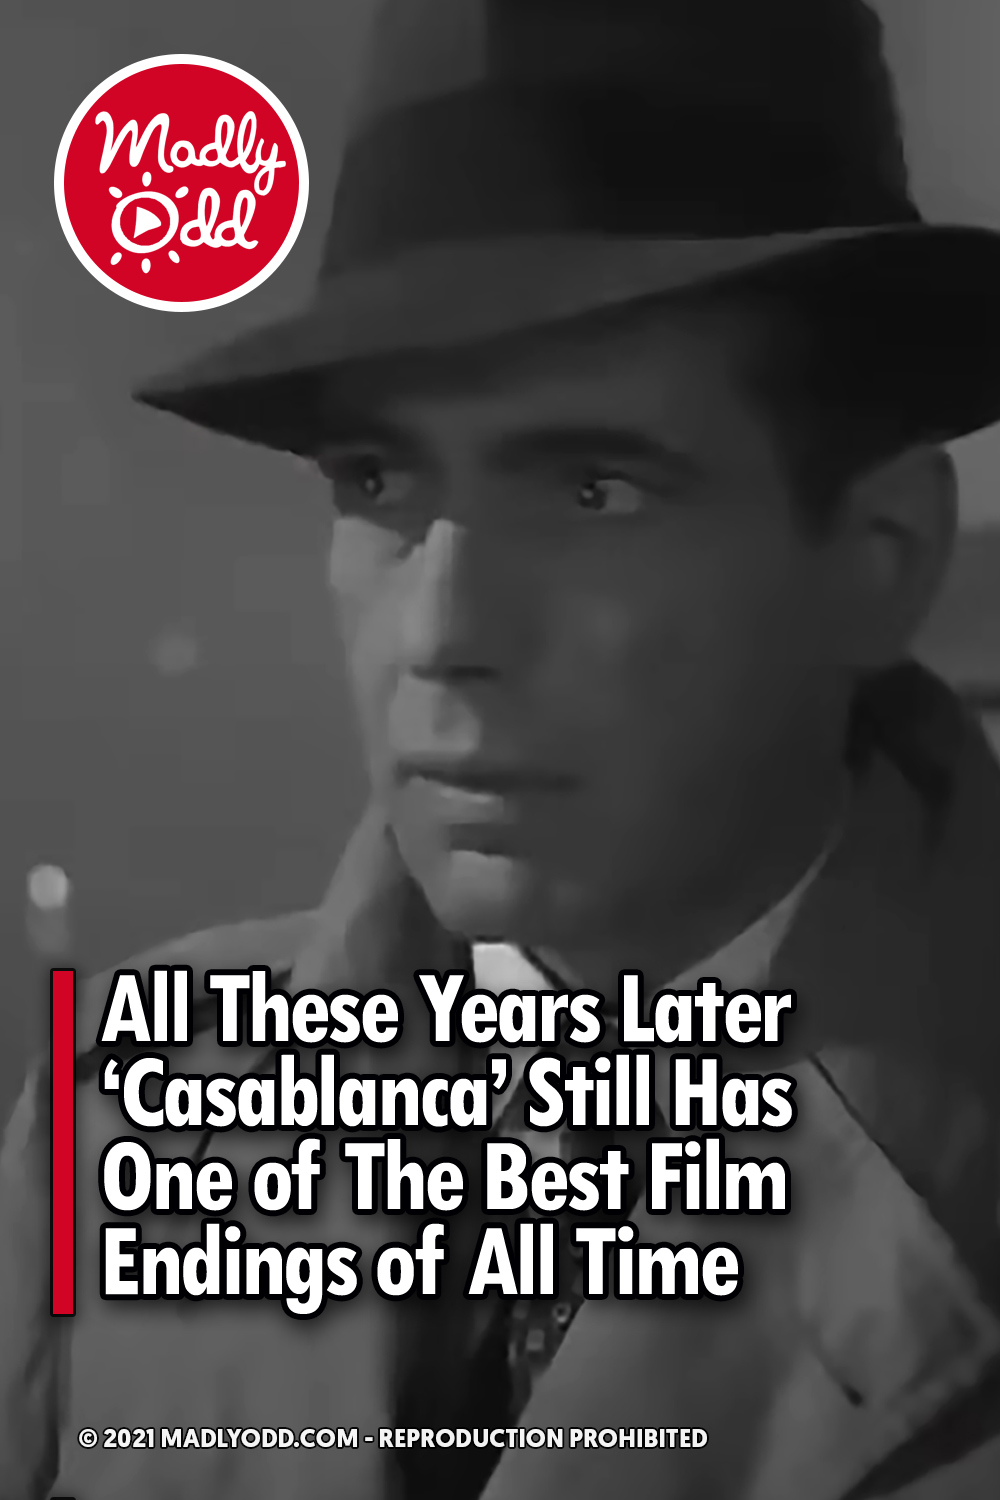 All These Years Later \'Casablanca\' Still Has One of The Best Film Endings of All Time